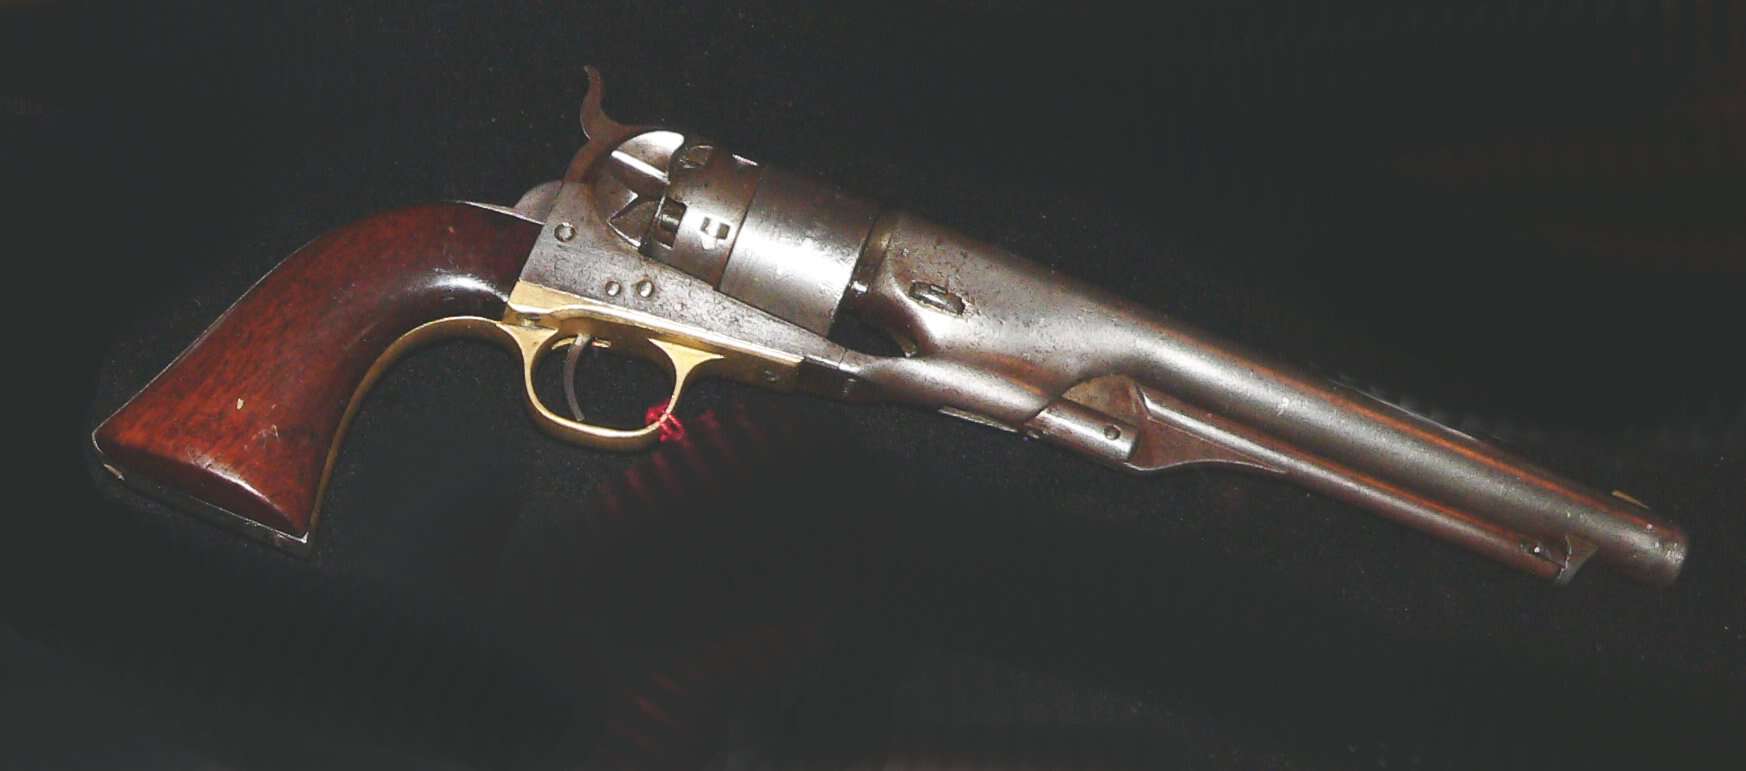 Colt-arme... by Rama